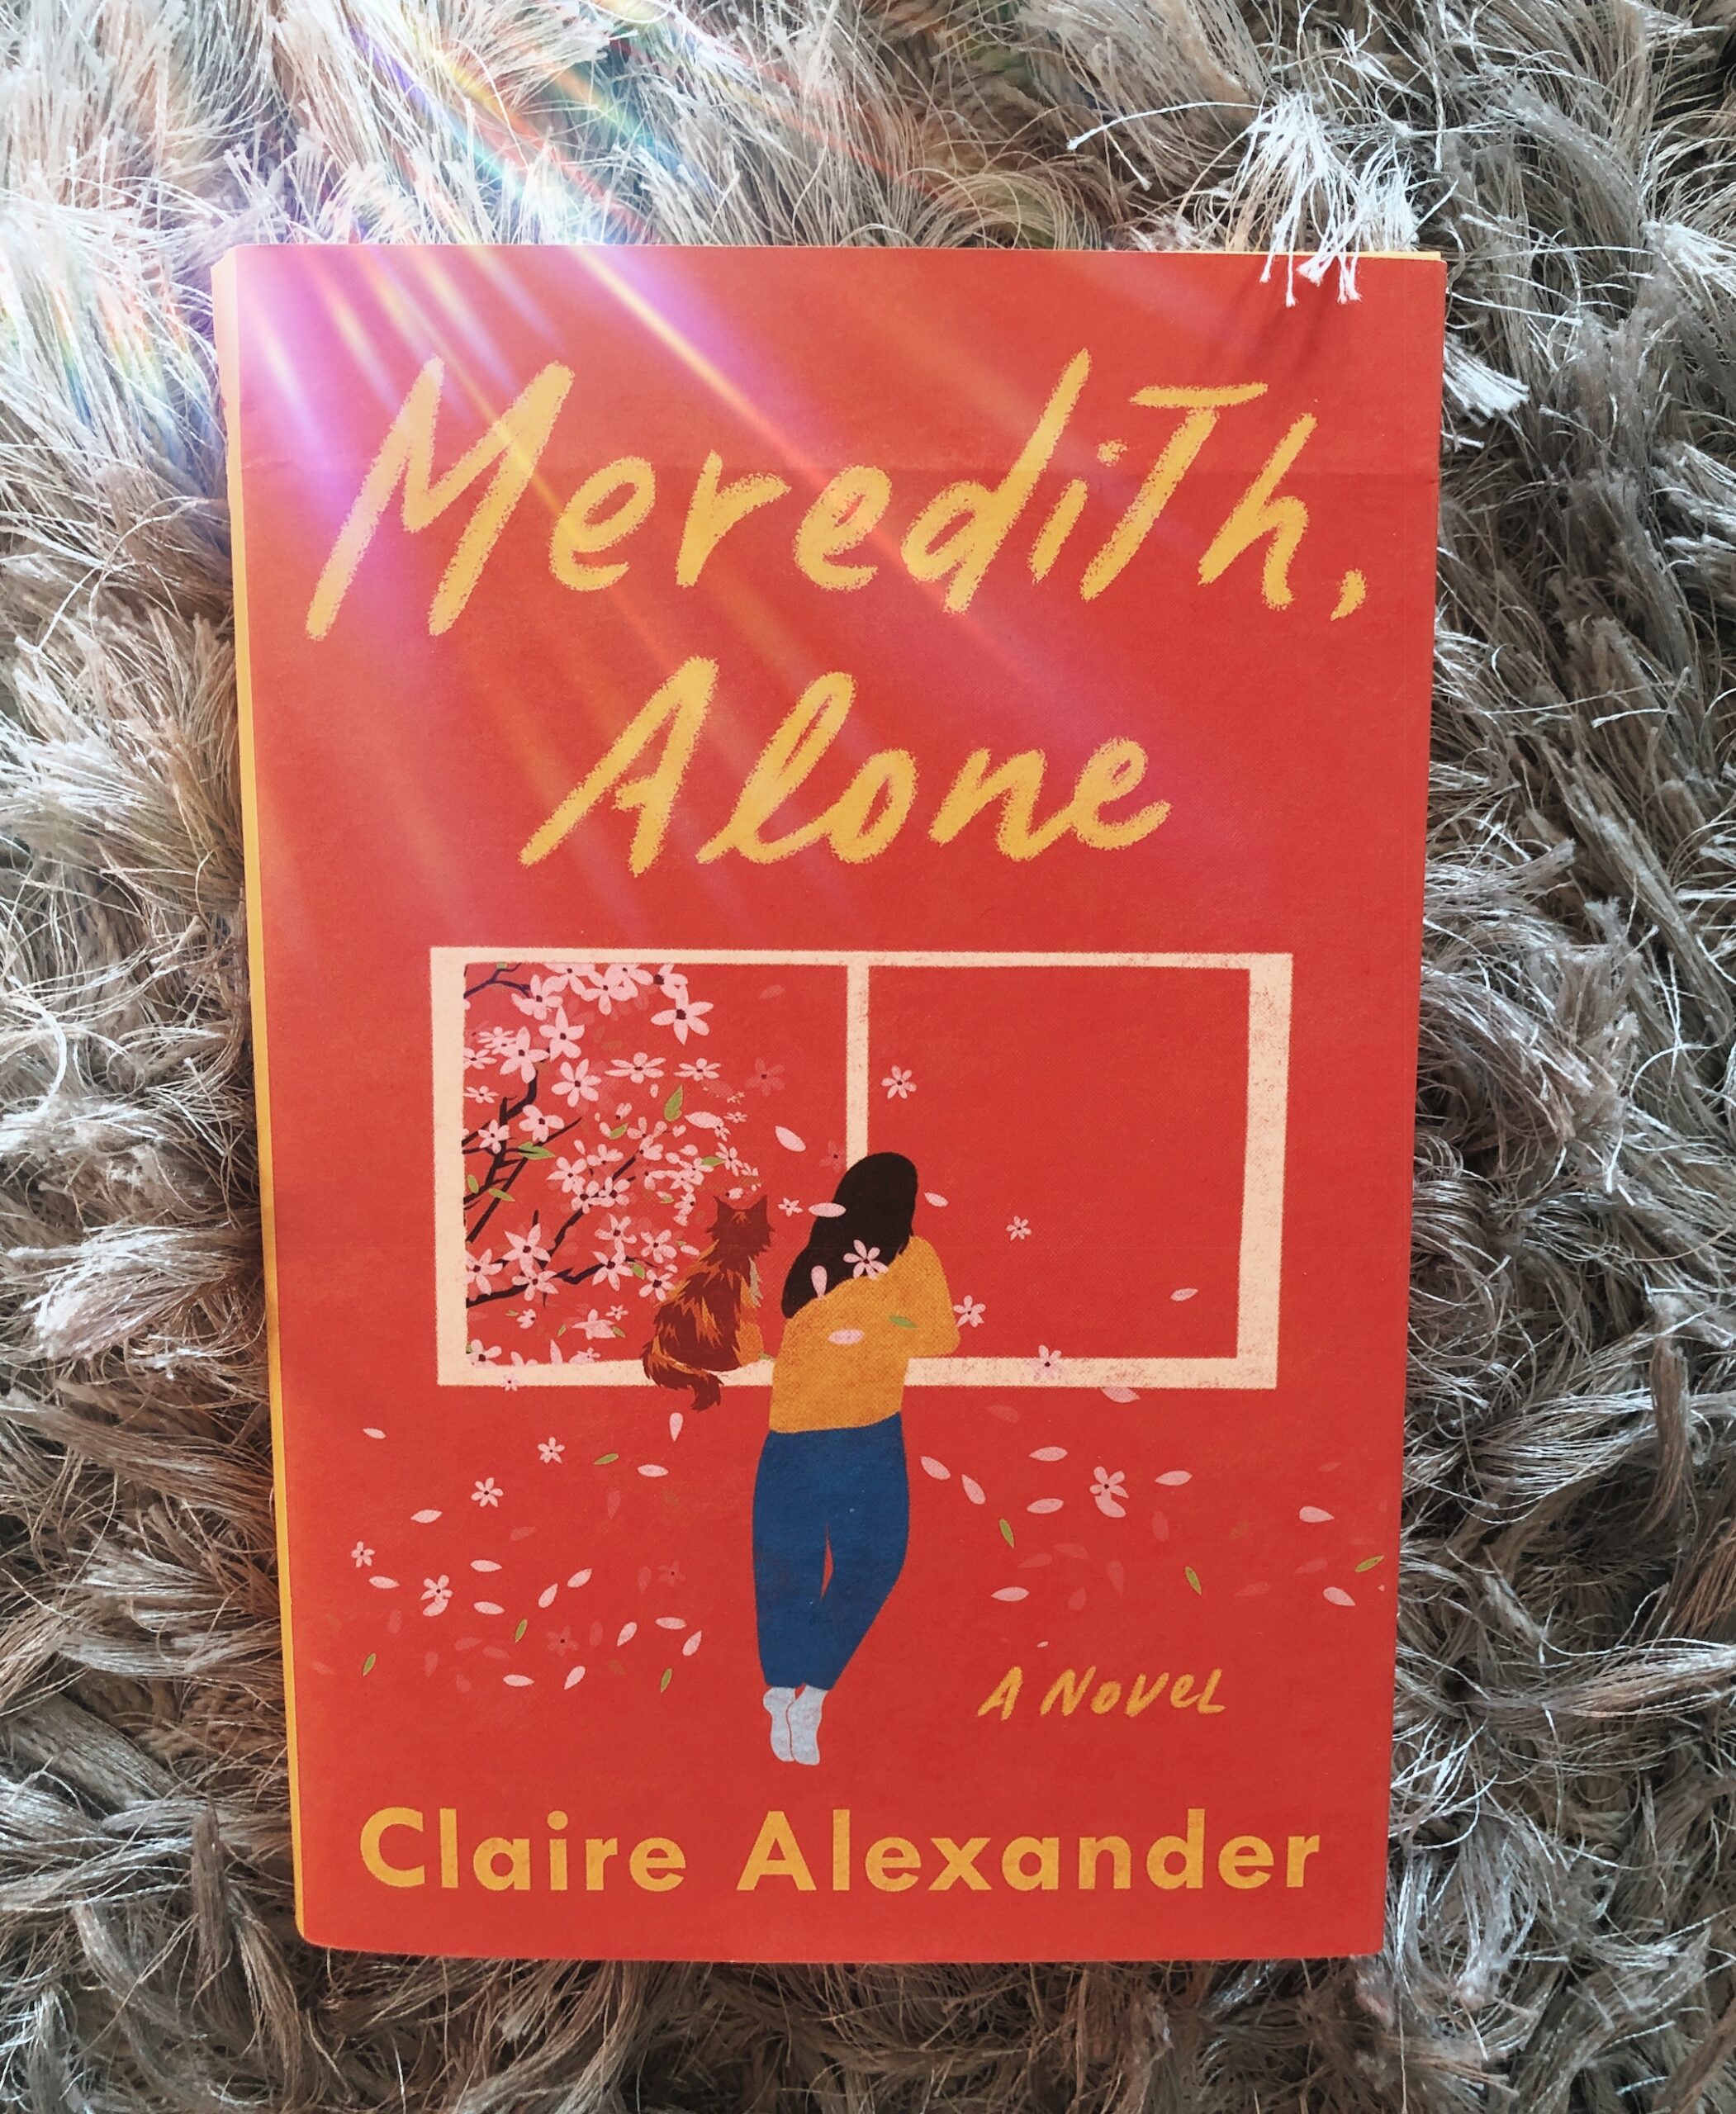 meredith alone by claire alexander